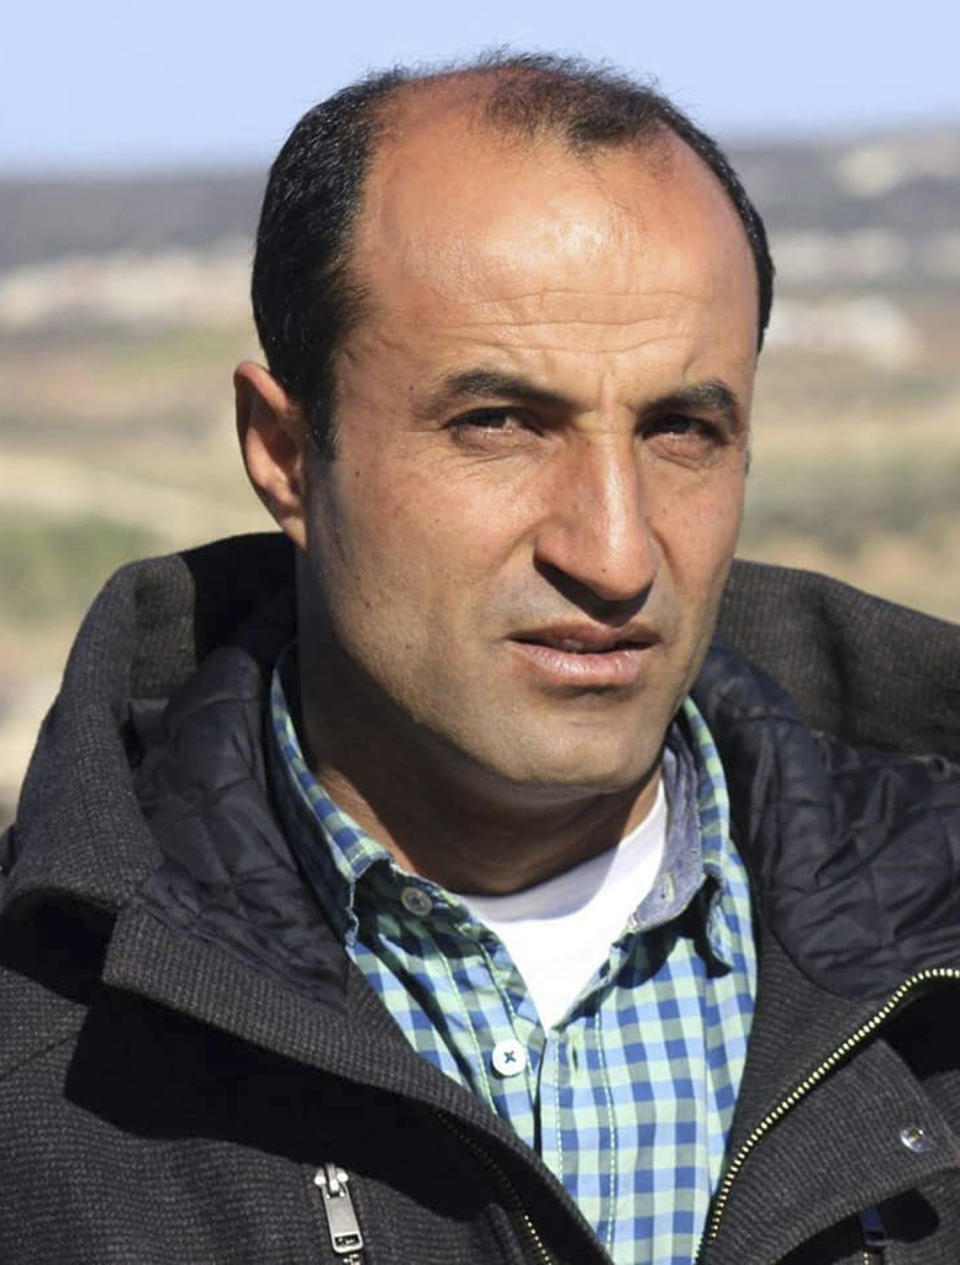 Hamoud al-Jnaid, a reporter and photographer for the independent radio station and website Radio Fresh, was killed in Kafranbel, Syria, Nov. 23, 2018. (Photo: Kafranbl News via AP)